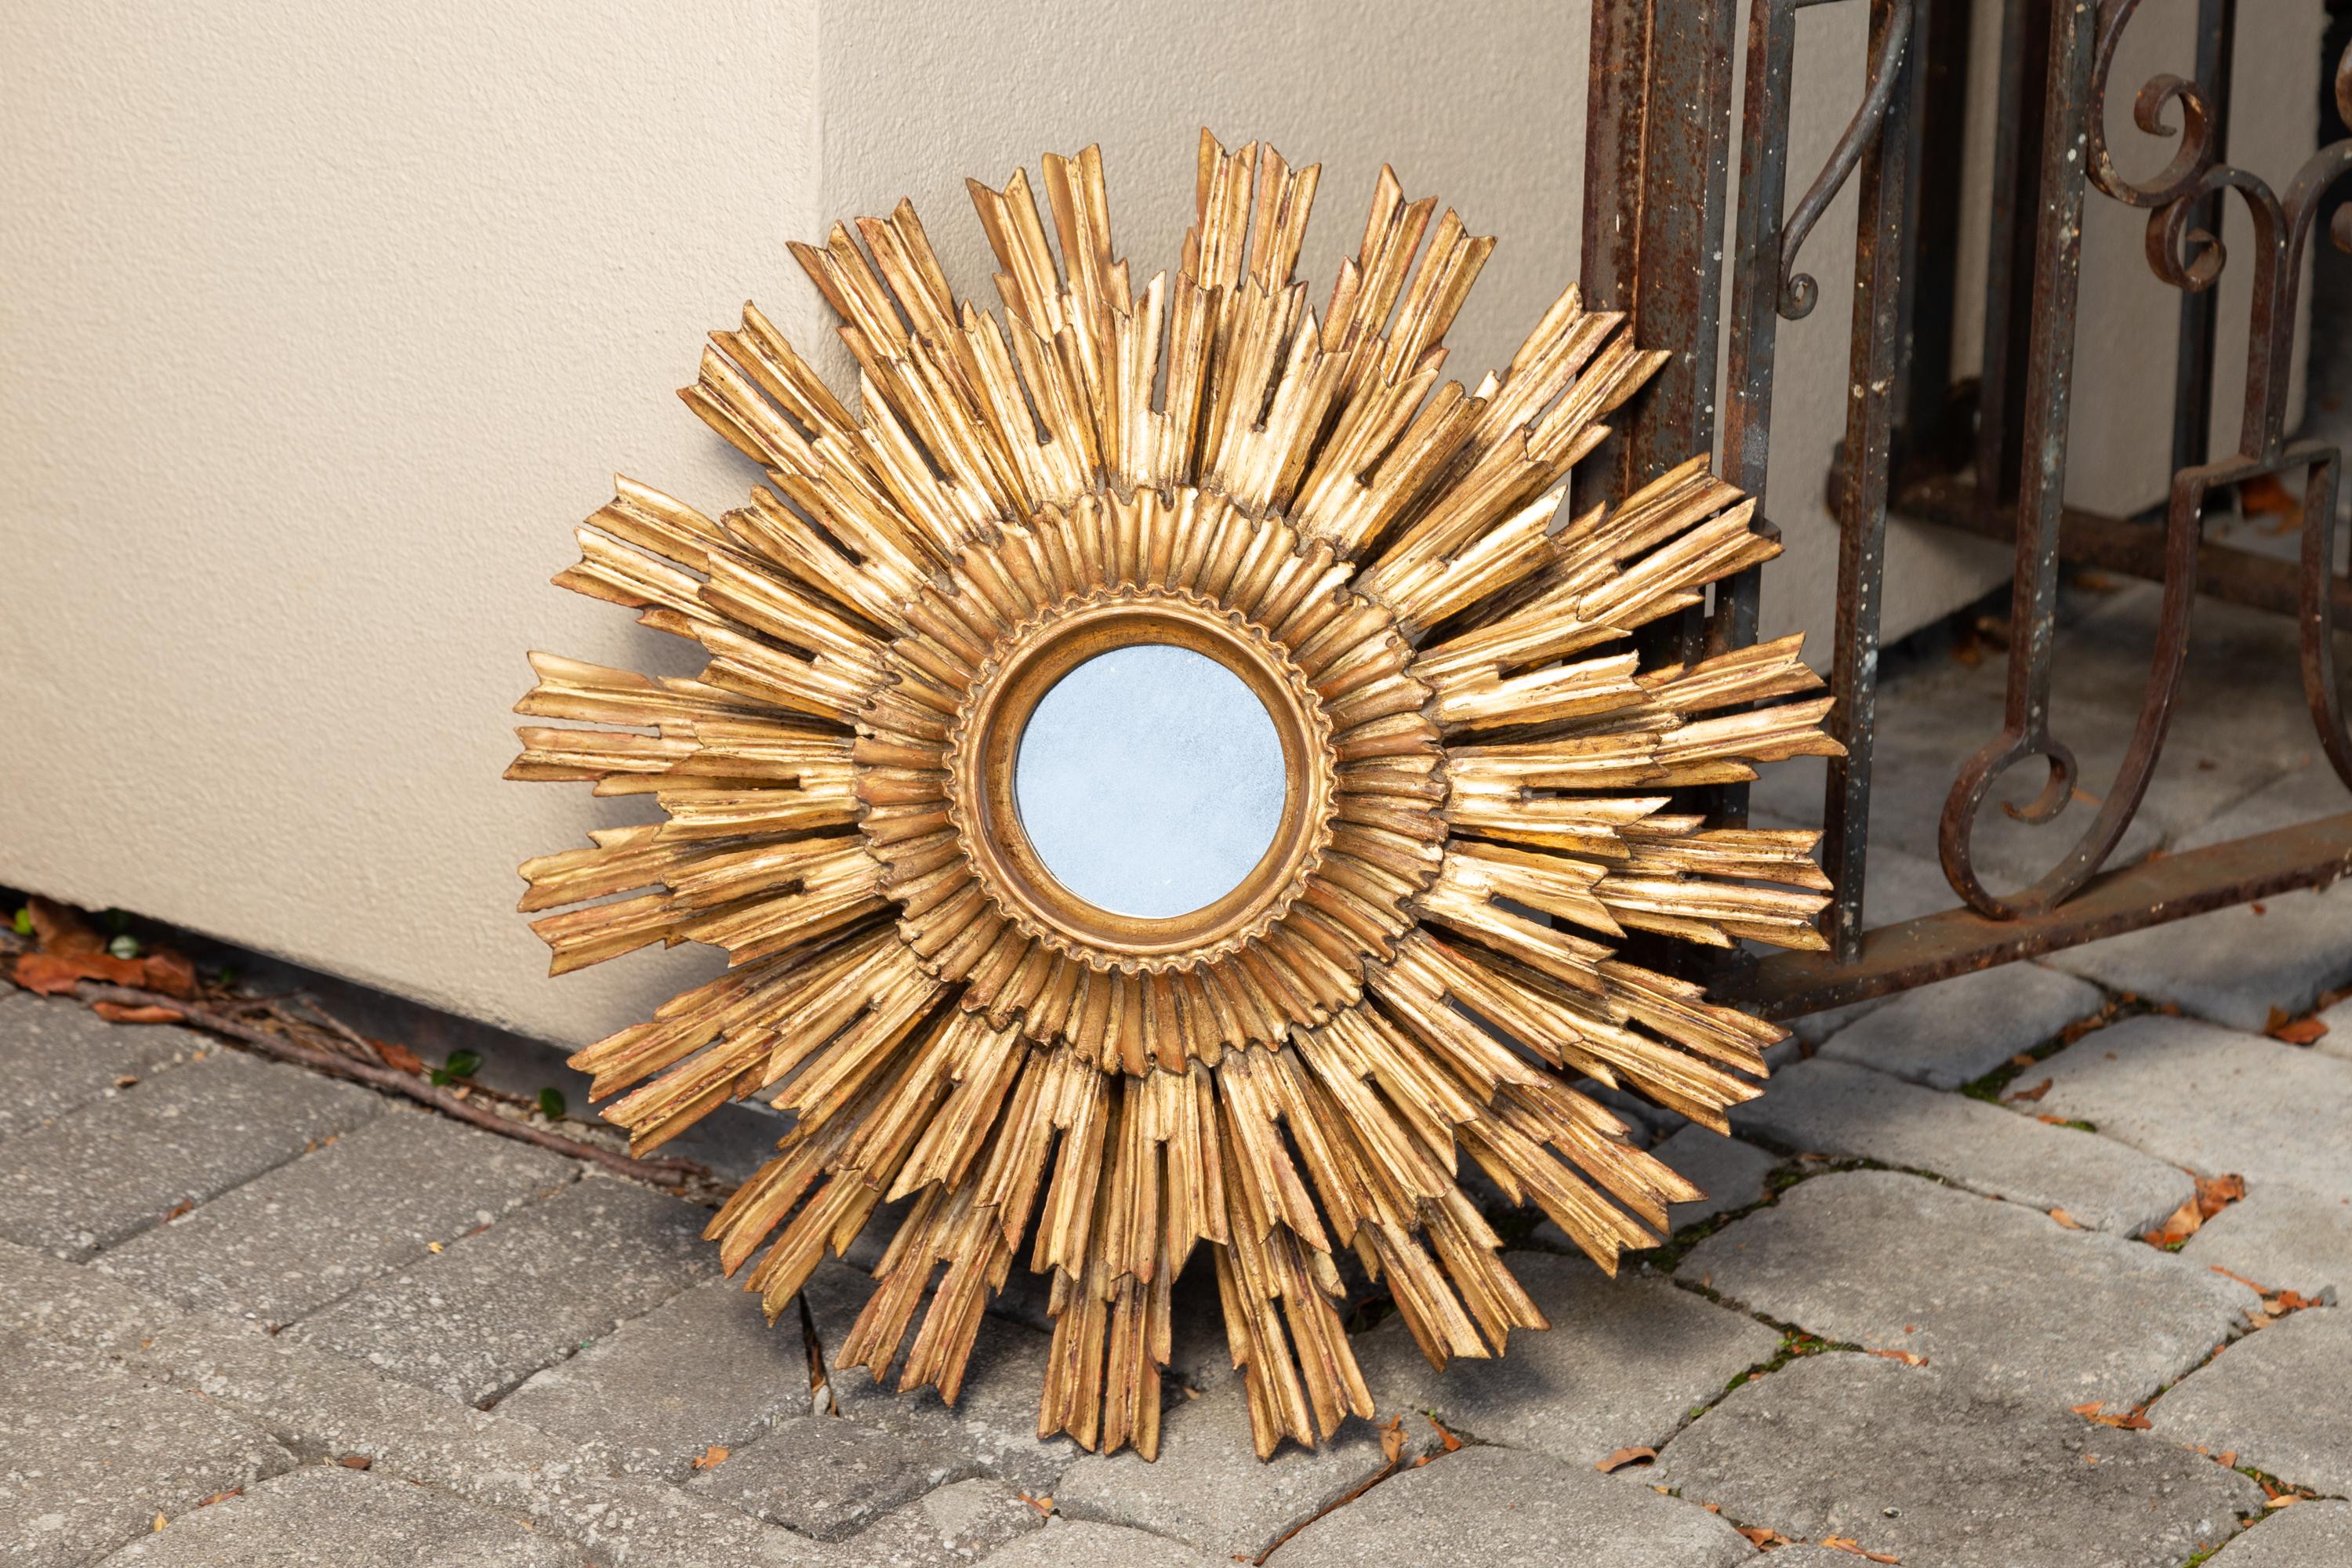 A vintage French giltwood sunburst mirror from the mid-20th century, with layered rays and small mirror plate. Born in France during the mid-century period, this exquisite sunburst mirror features a petite central mirror plate surrounded by a molded